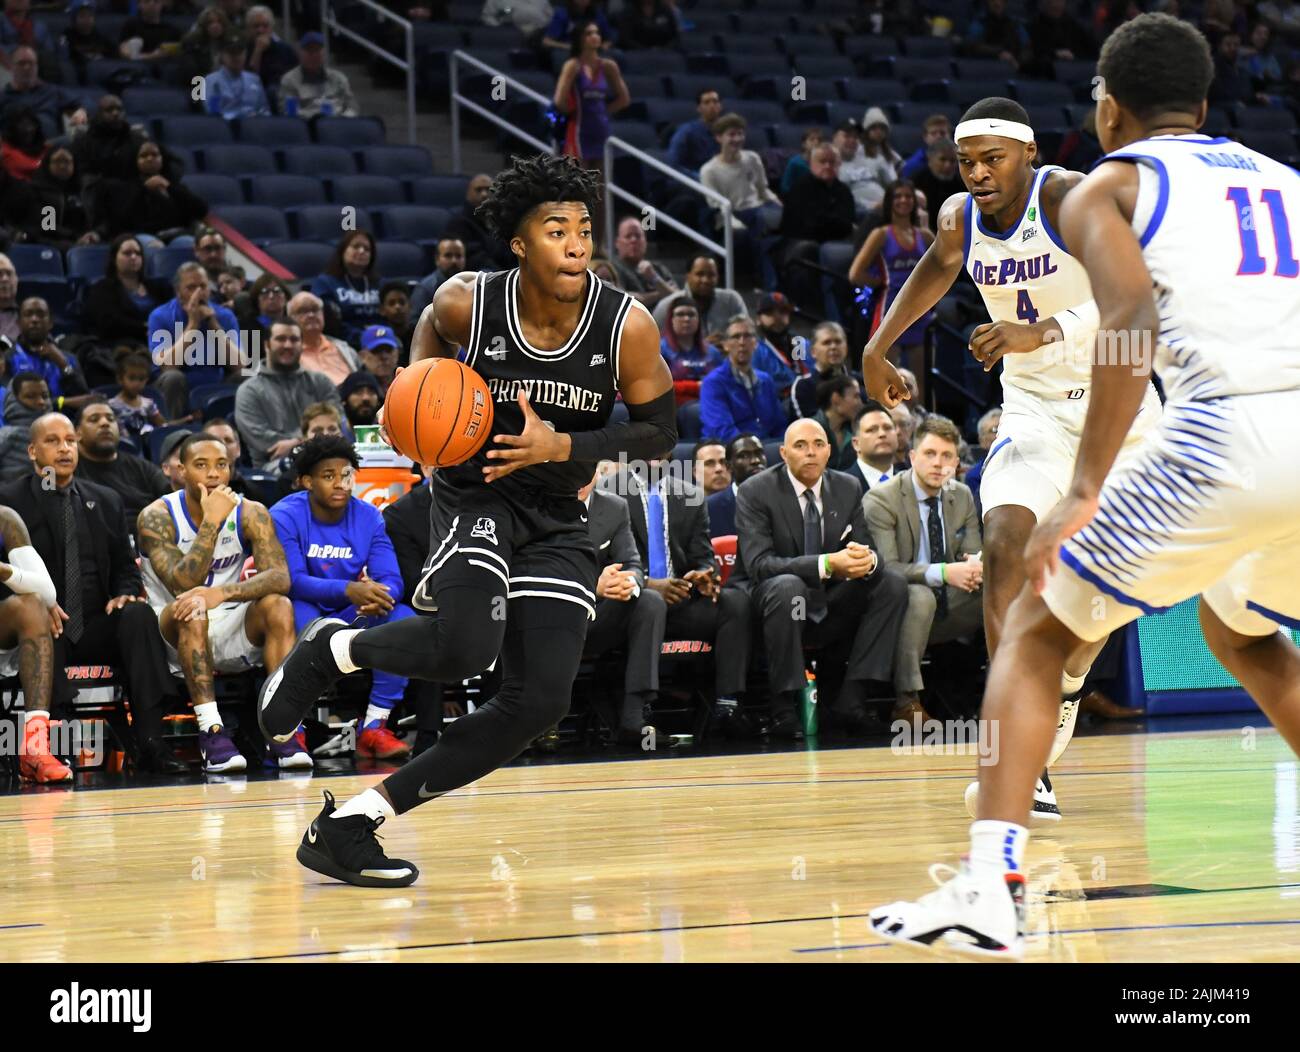 Chicago, Illinois, USA. 04th Jan, 2020. Providence Friars guard David Duke (3) in driving to the basket during the NCAA Big East conference basketball game between DePaul vs Providence at Wintrust Area in Chicago, Illinois. Dean Reid/CSM/Alamy Live News Stock Photo